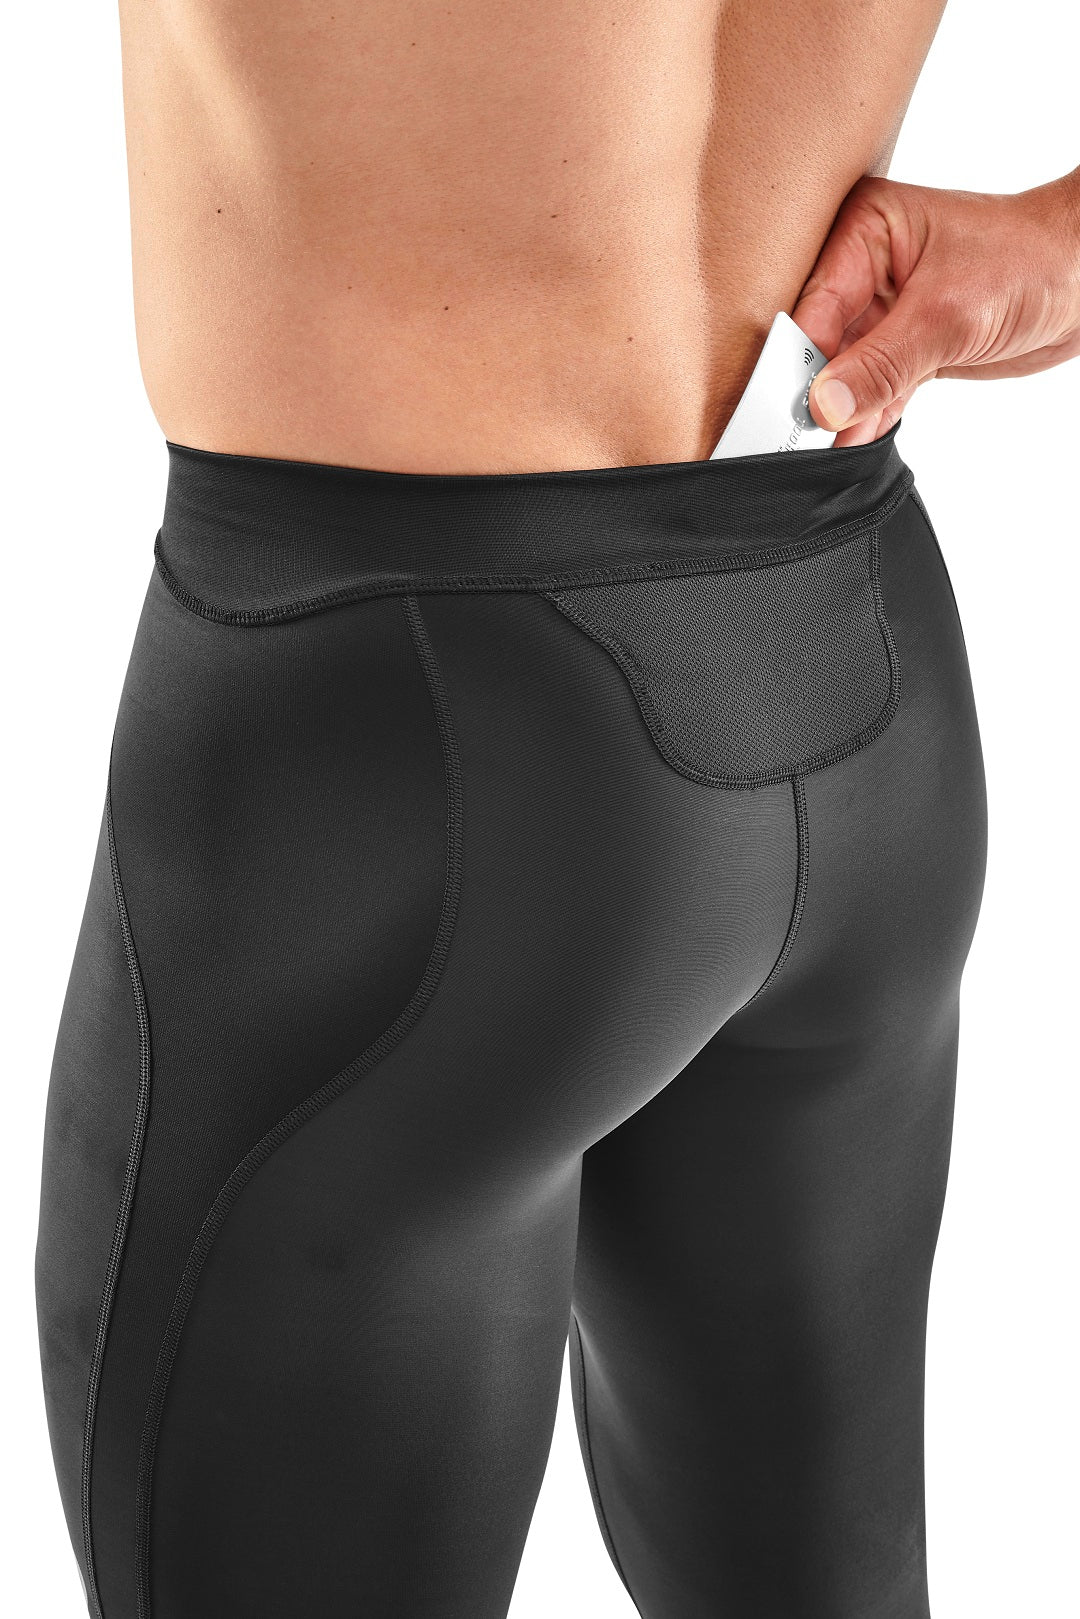 SKINS K-PROPRIUM MEN'S COMPRESSION LONG TIGHTS, Men's Fashion, Activewear  on Carousell